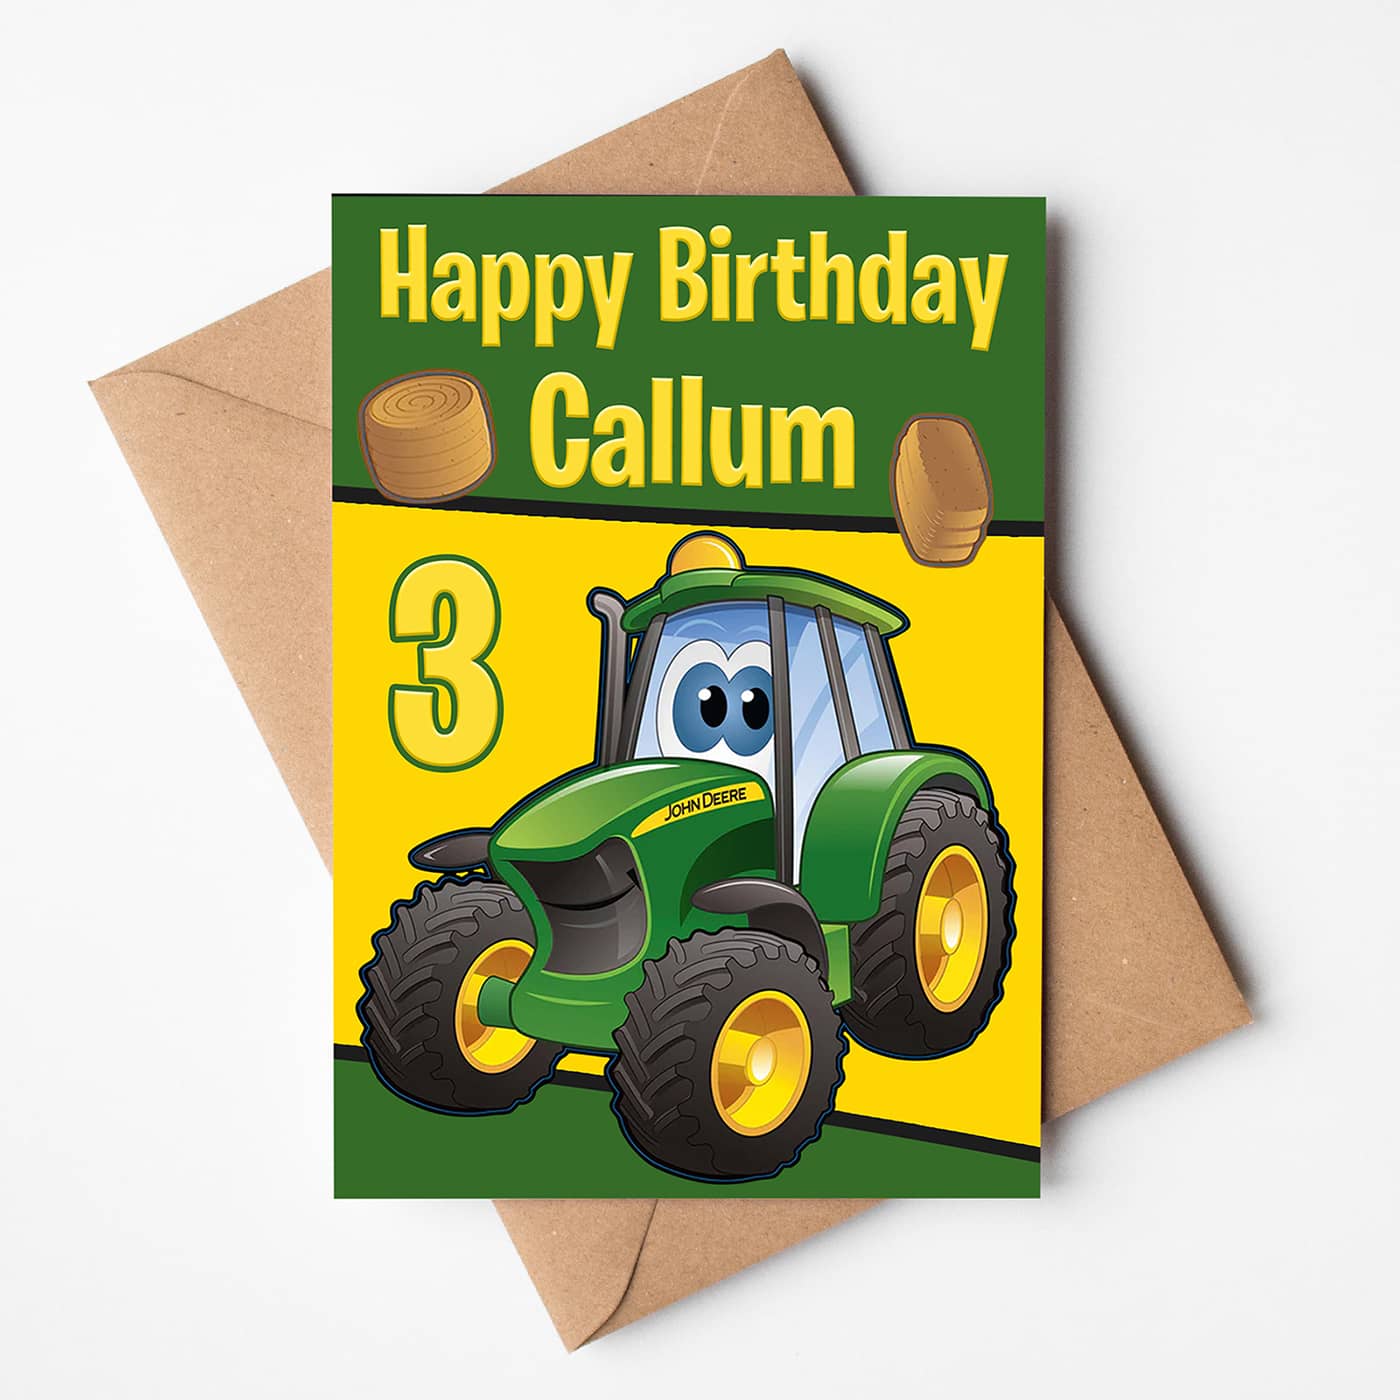 Colourful birthday card featuring the John Deere tractor "Johnny Tractor". Printing in County Monaghan, Ireland by Design Gaff